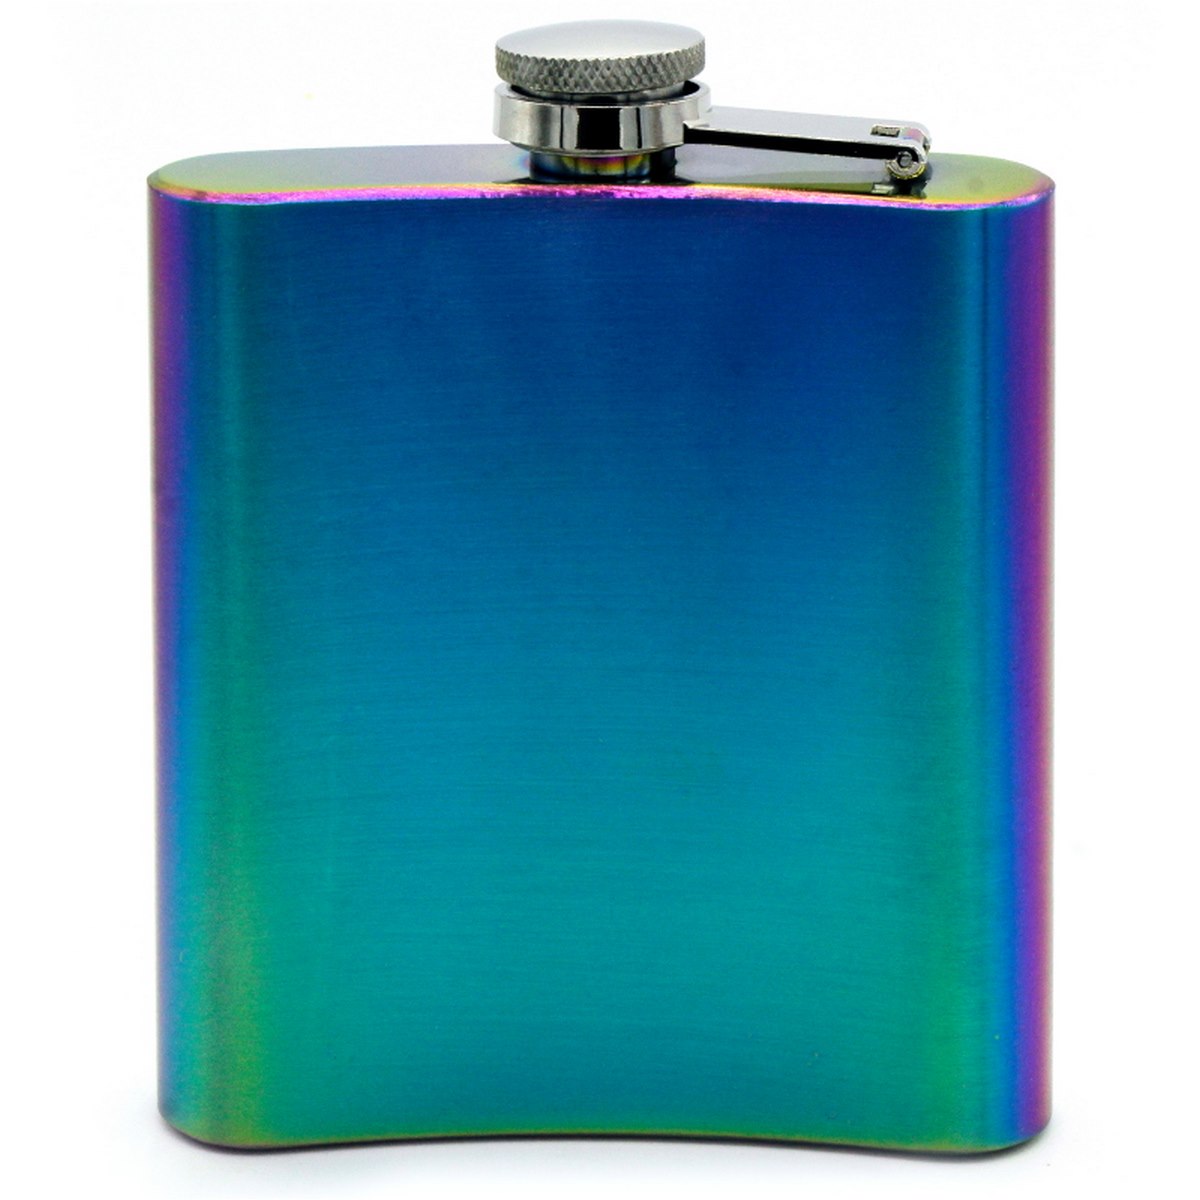 Rainbow Stainless Steel Hip Flask 7oz - For Corporate Gifting, Return Gift, Personal Use JA70ZMC